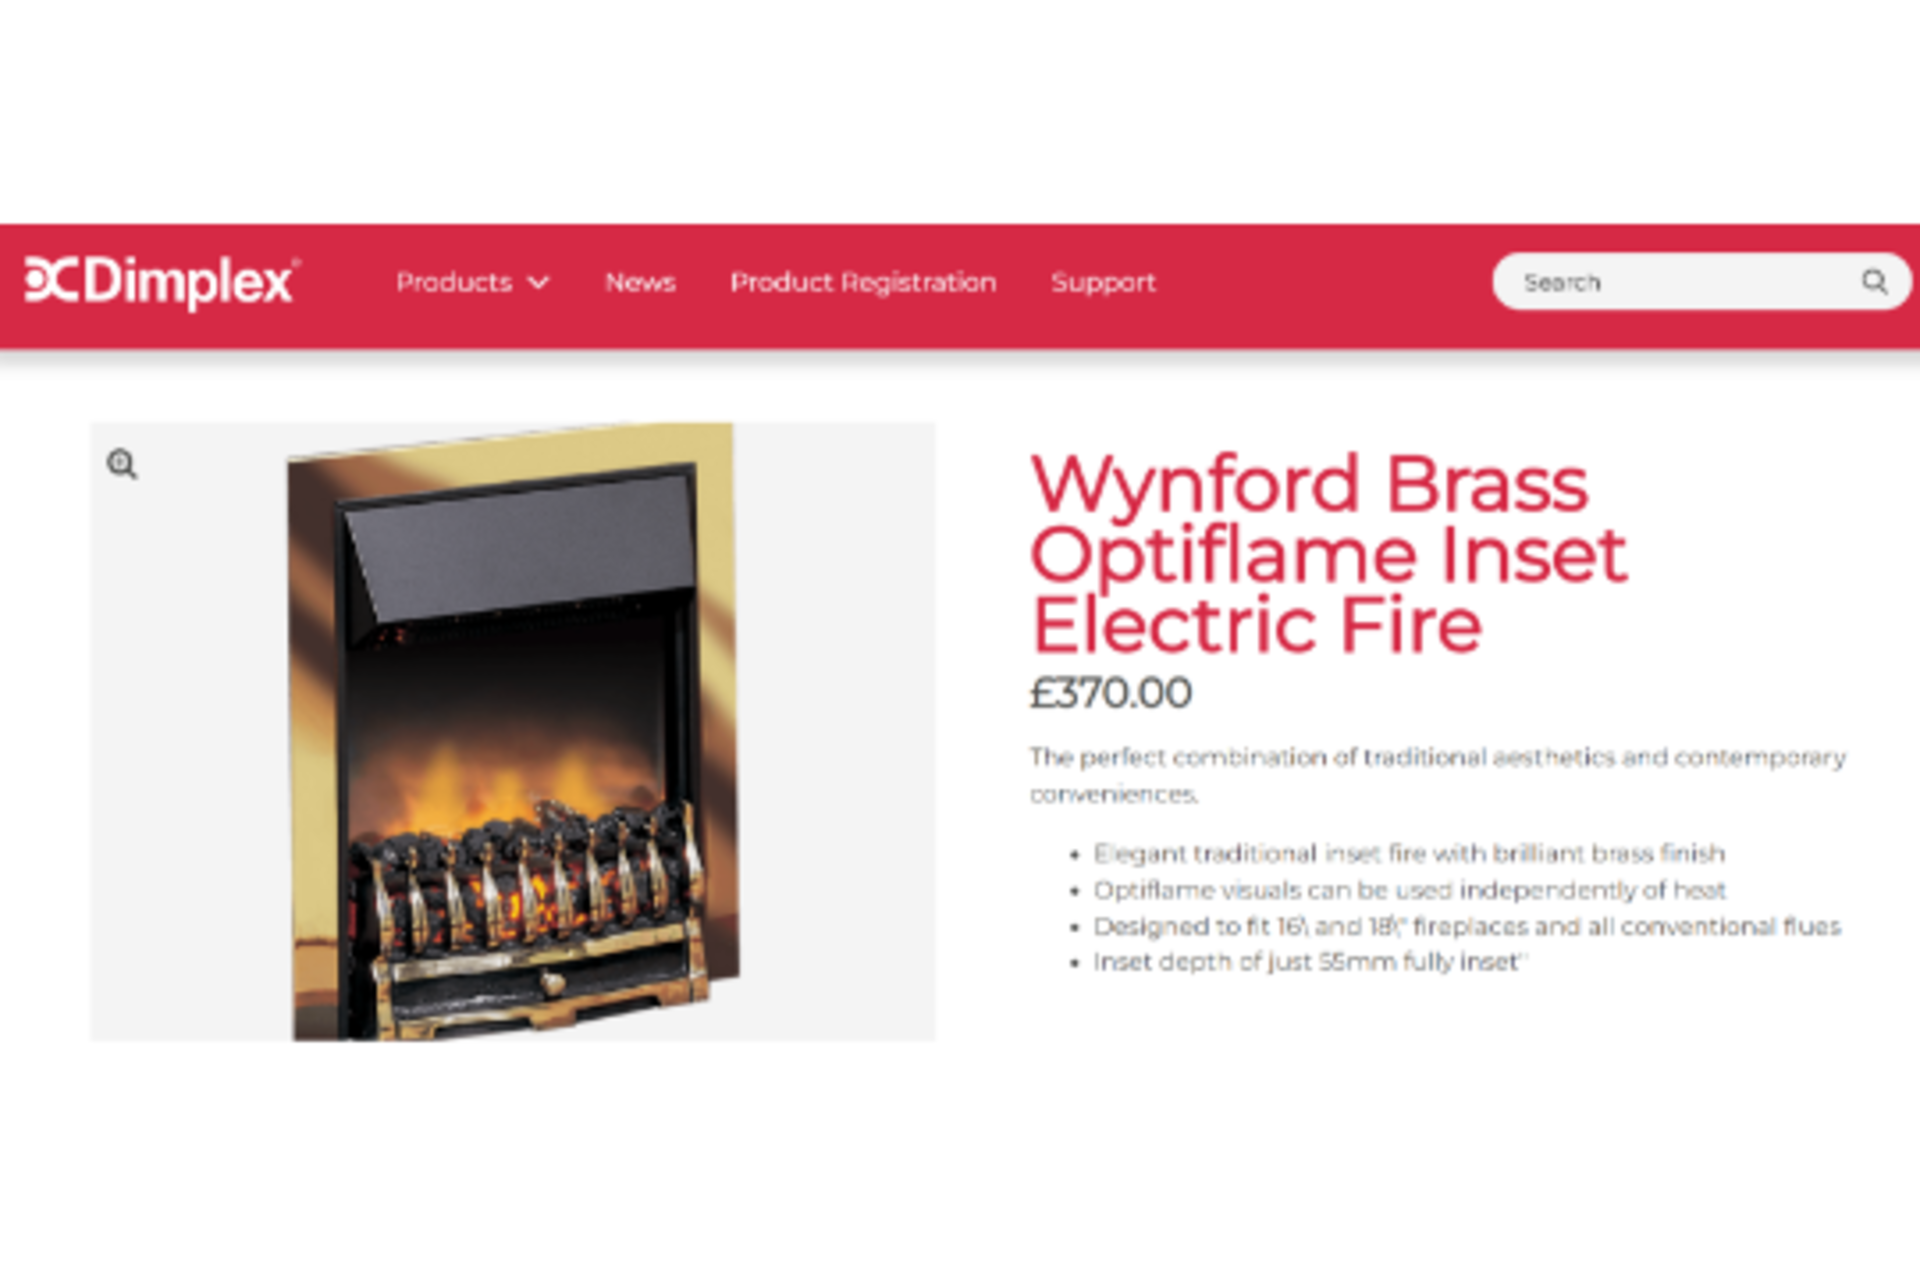 BRAND NEW BOXED Dimplex Wynford Brass Optiflame Inset Electric Fire RRP £370.00. The perfect